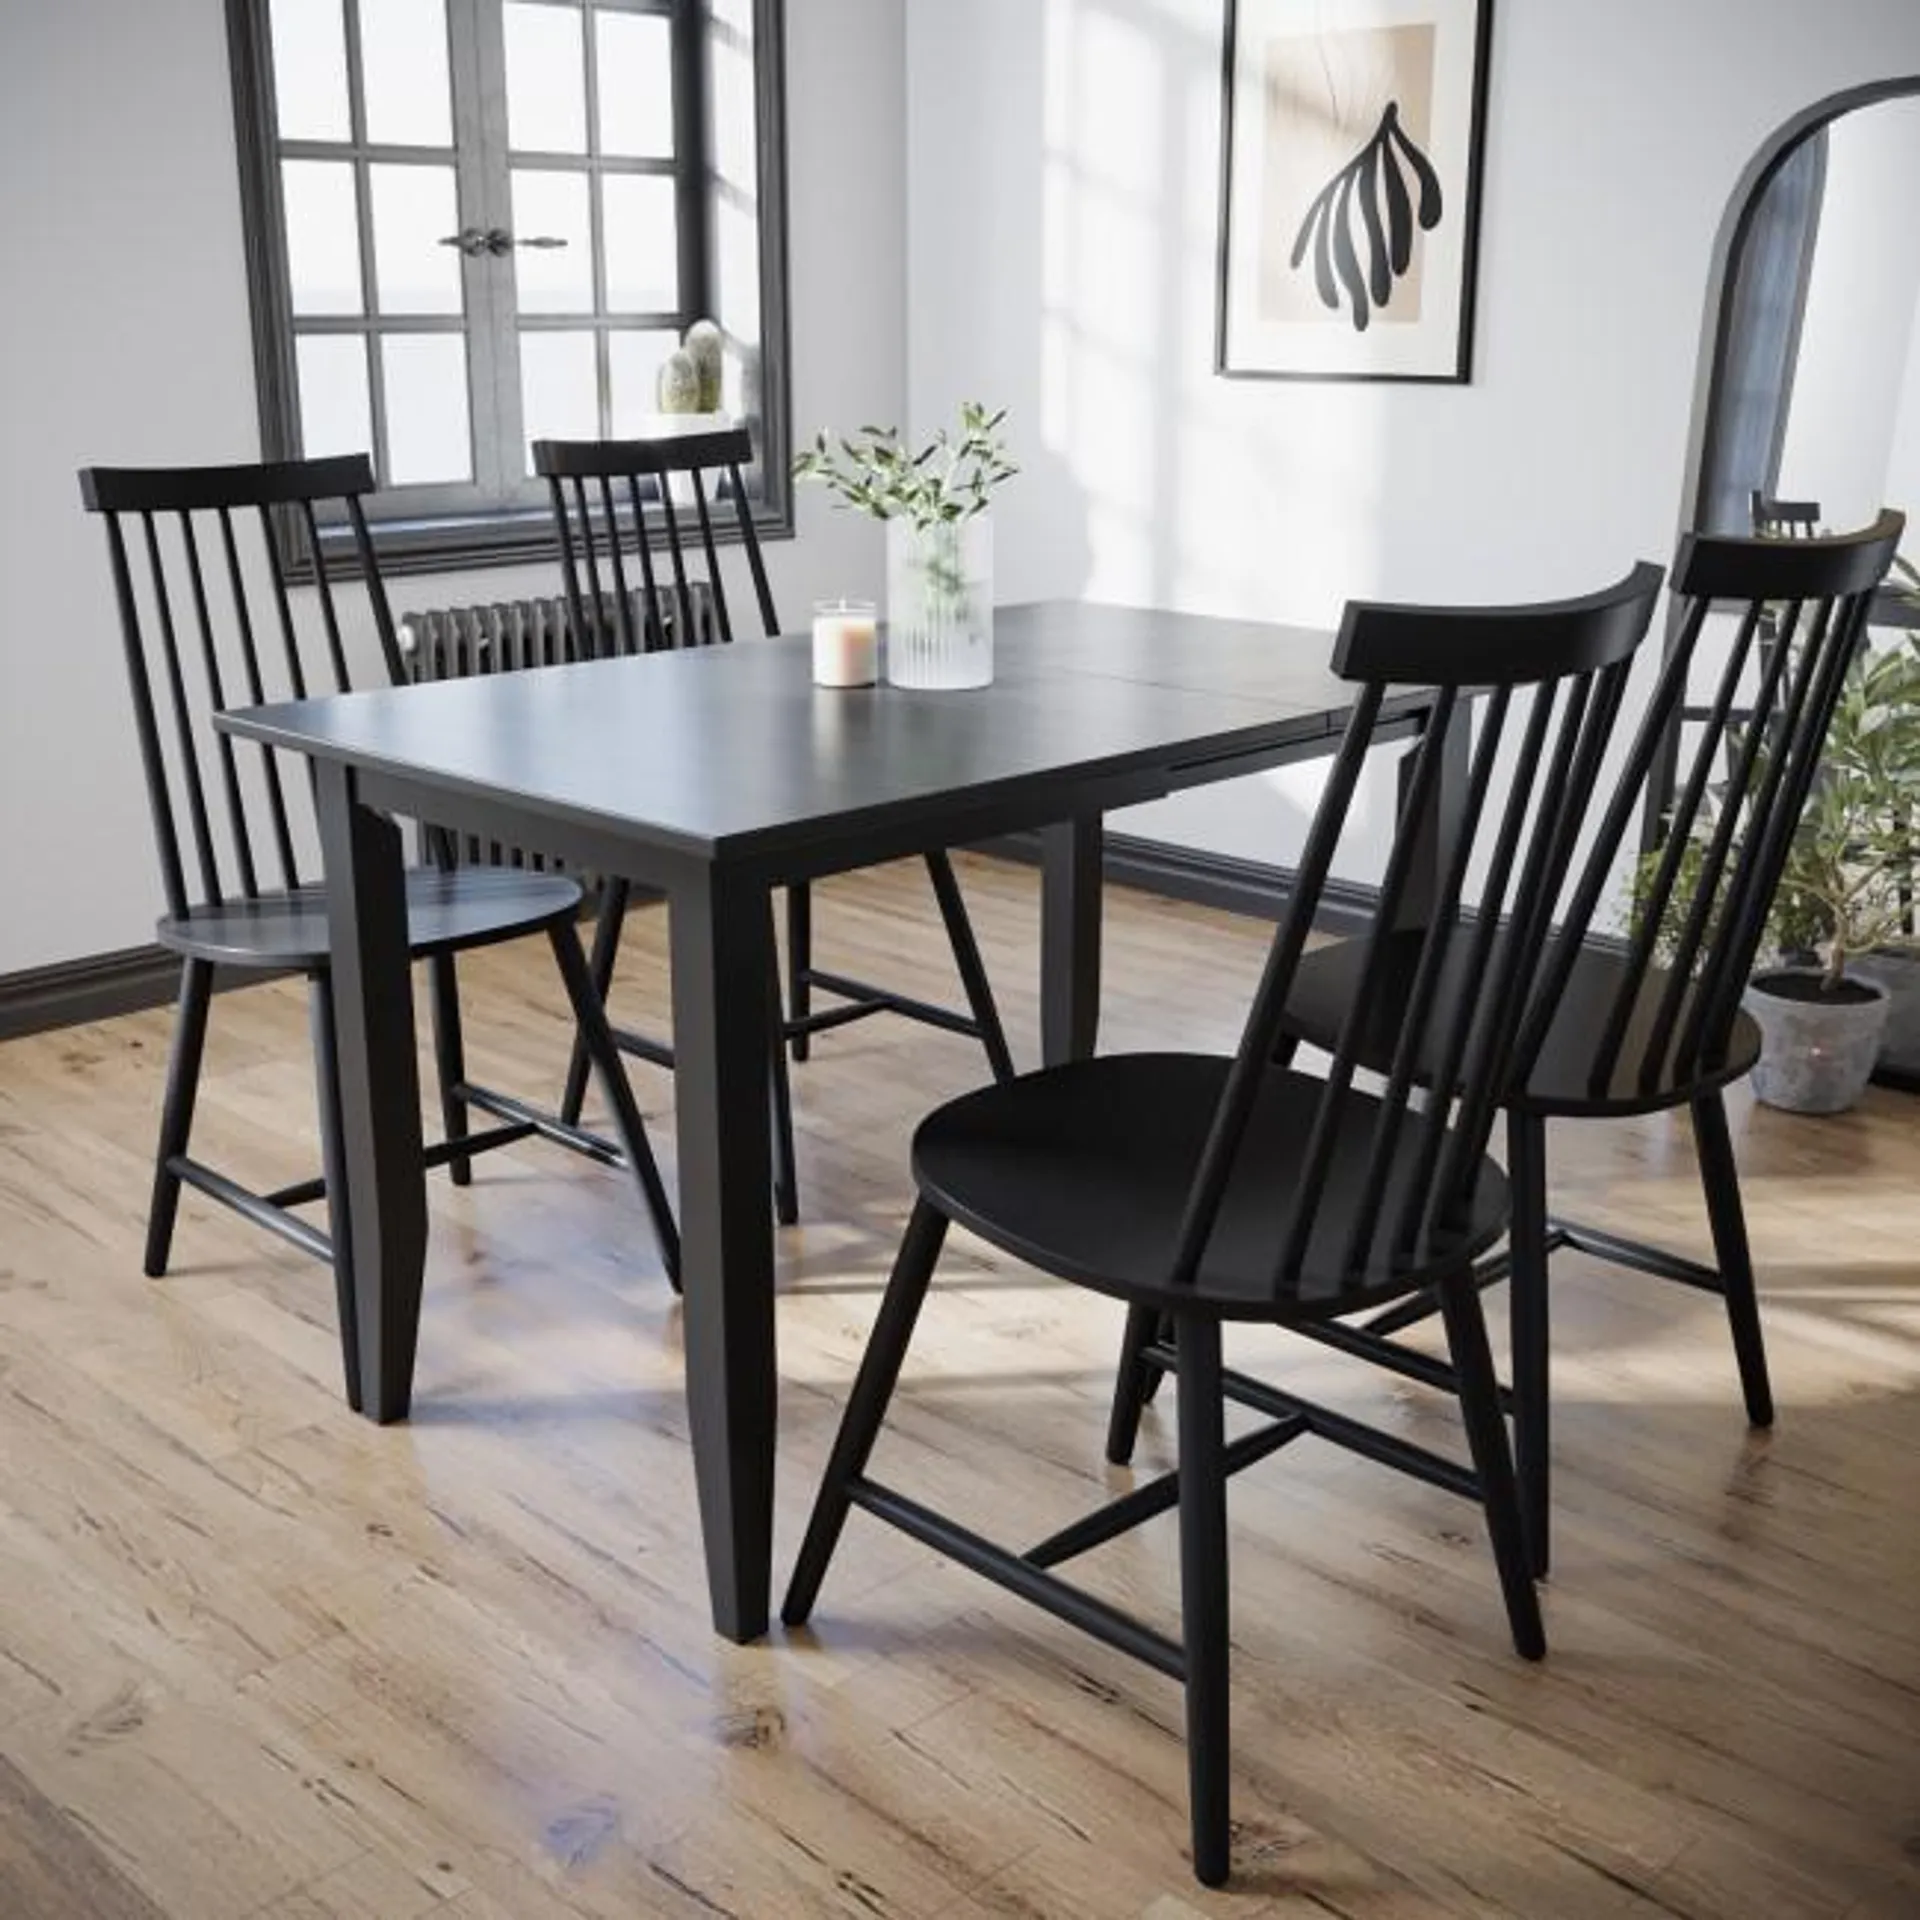 Drop Leaf Black Dining Table with 4 Black Spindle Dining Chairs - Olsen